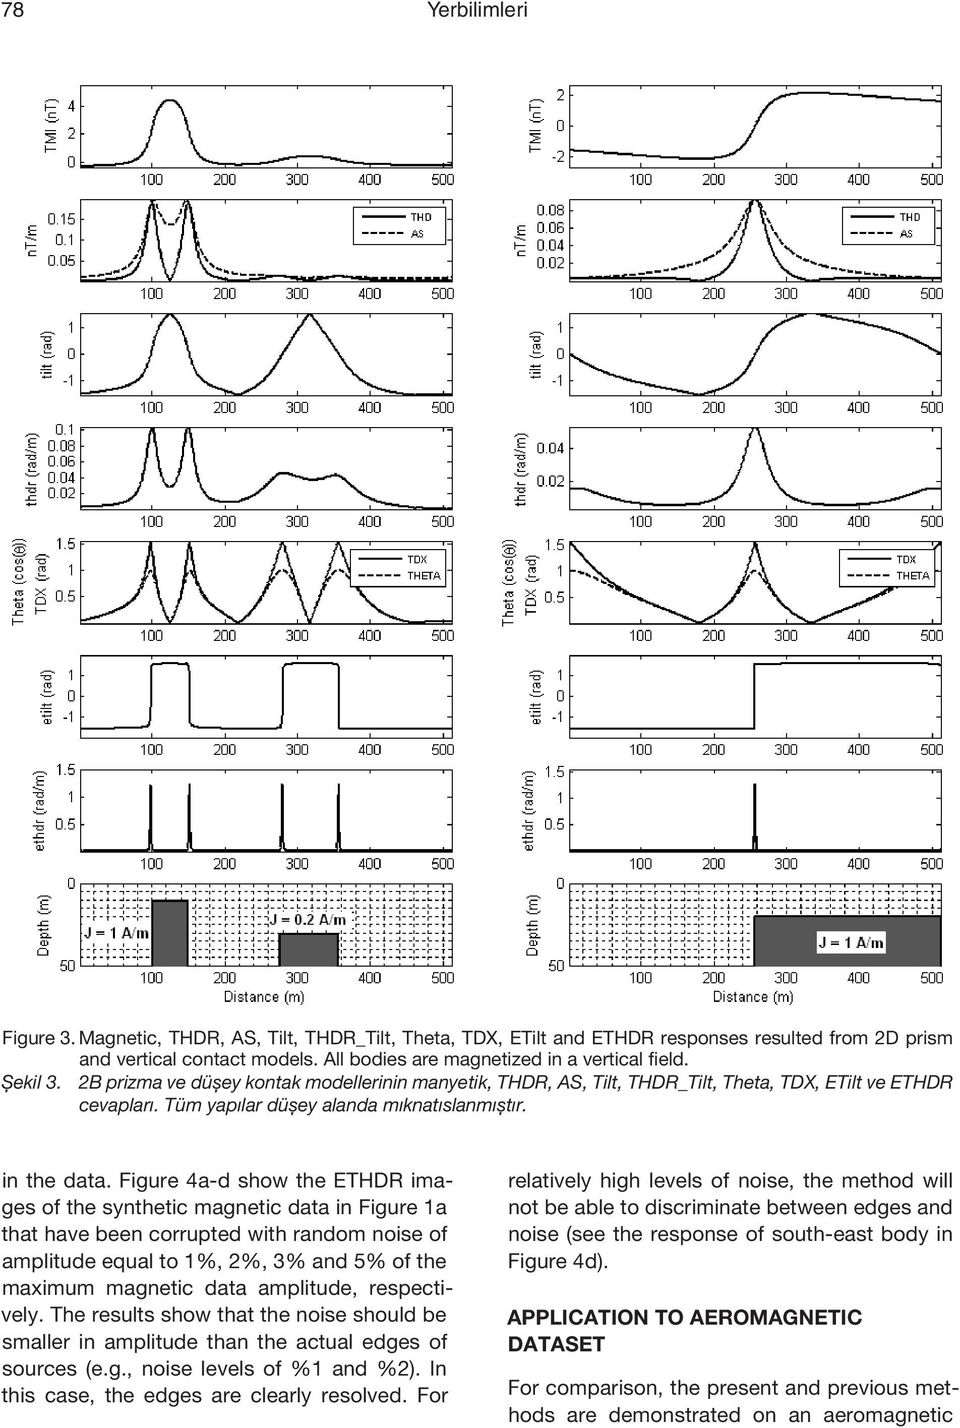 Figure 4a-d show the ETHDR images of the synthetic magnetic data in Figure 1a that have been corrupted with random noise of amplitude equal to 1%, %, 3% and 5% of the maximum magnetic data amplitude,